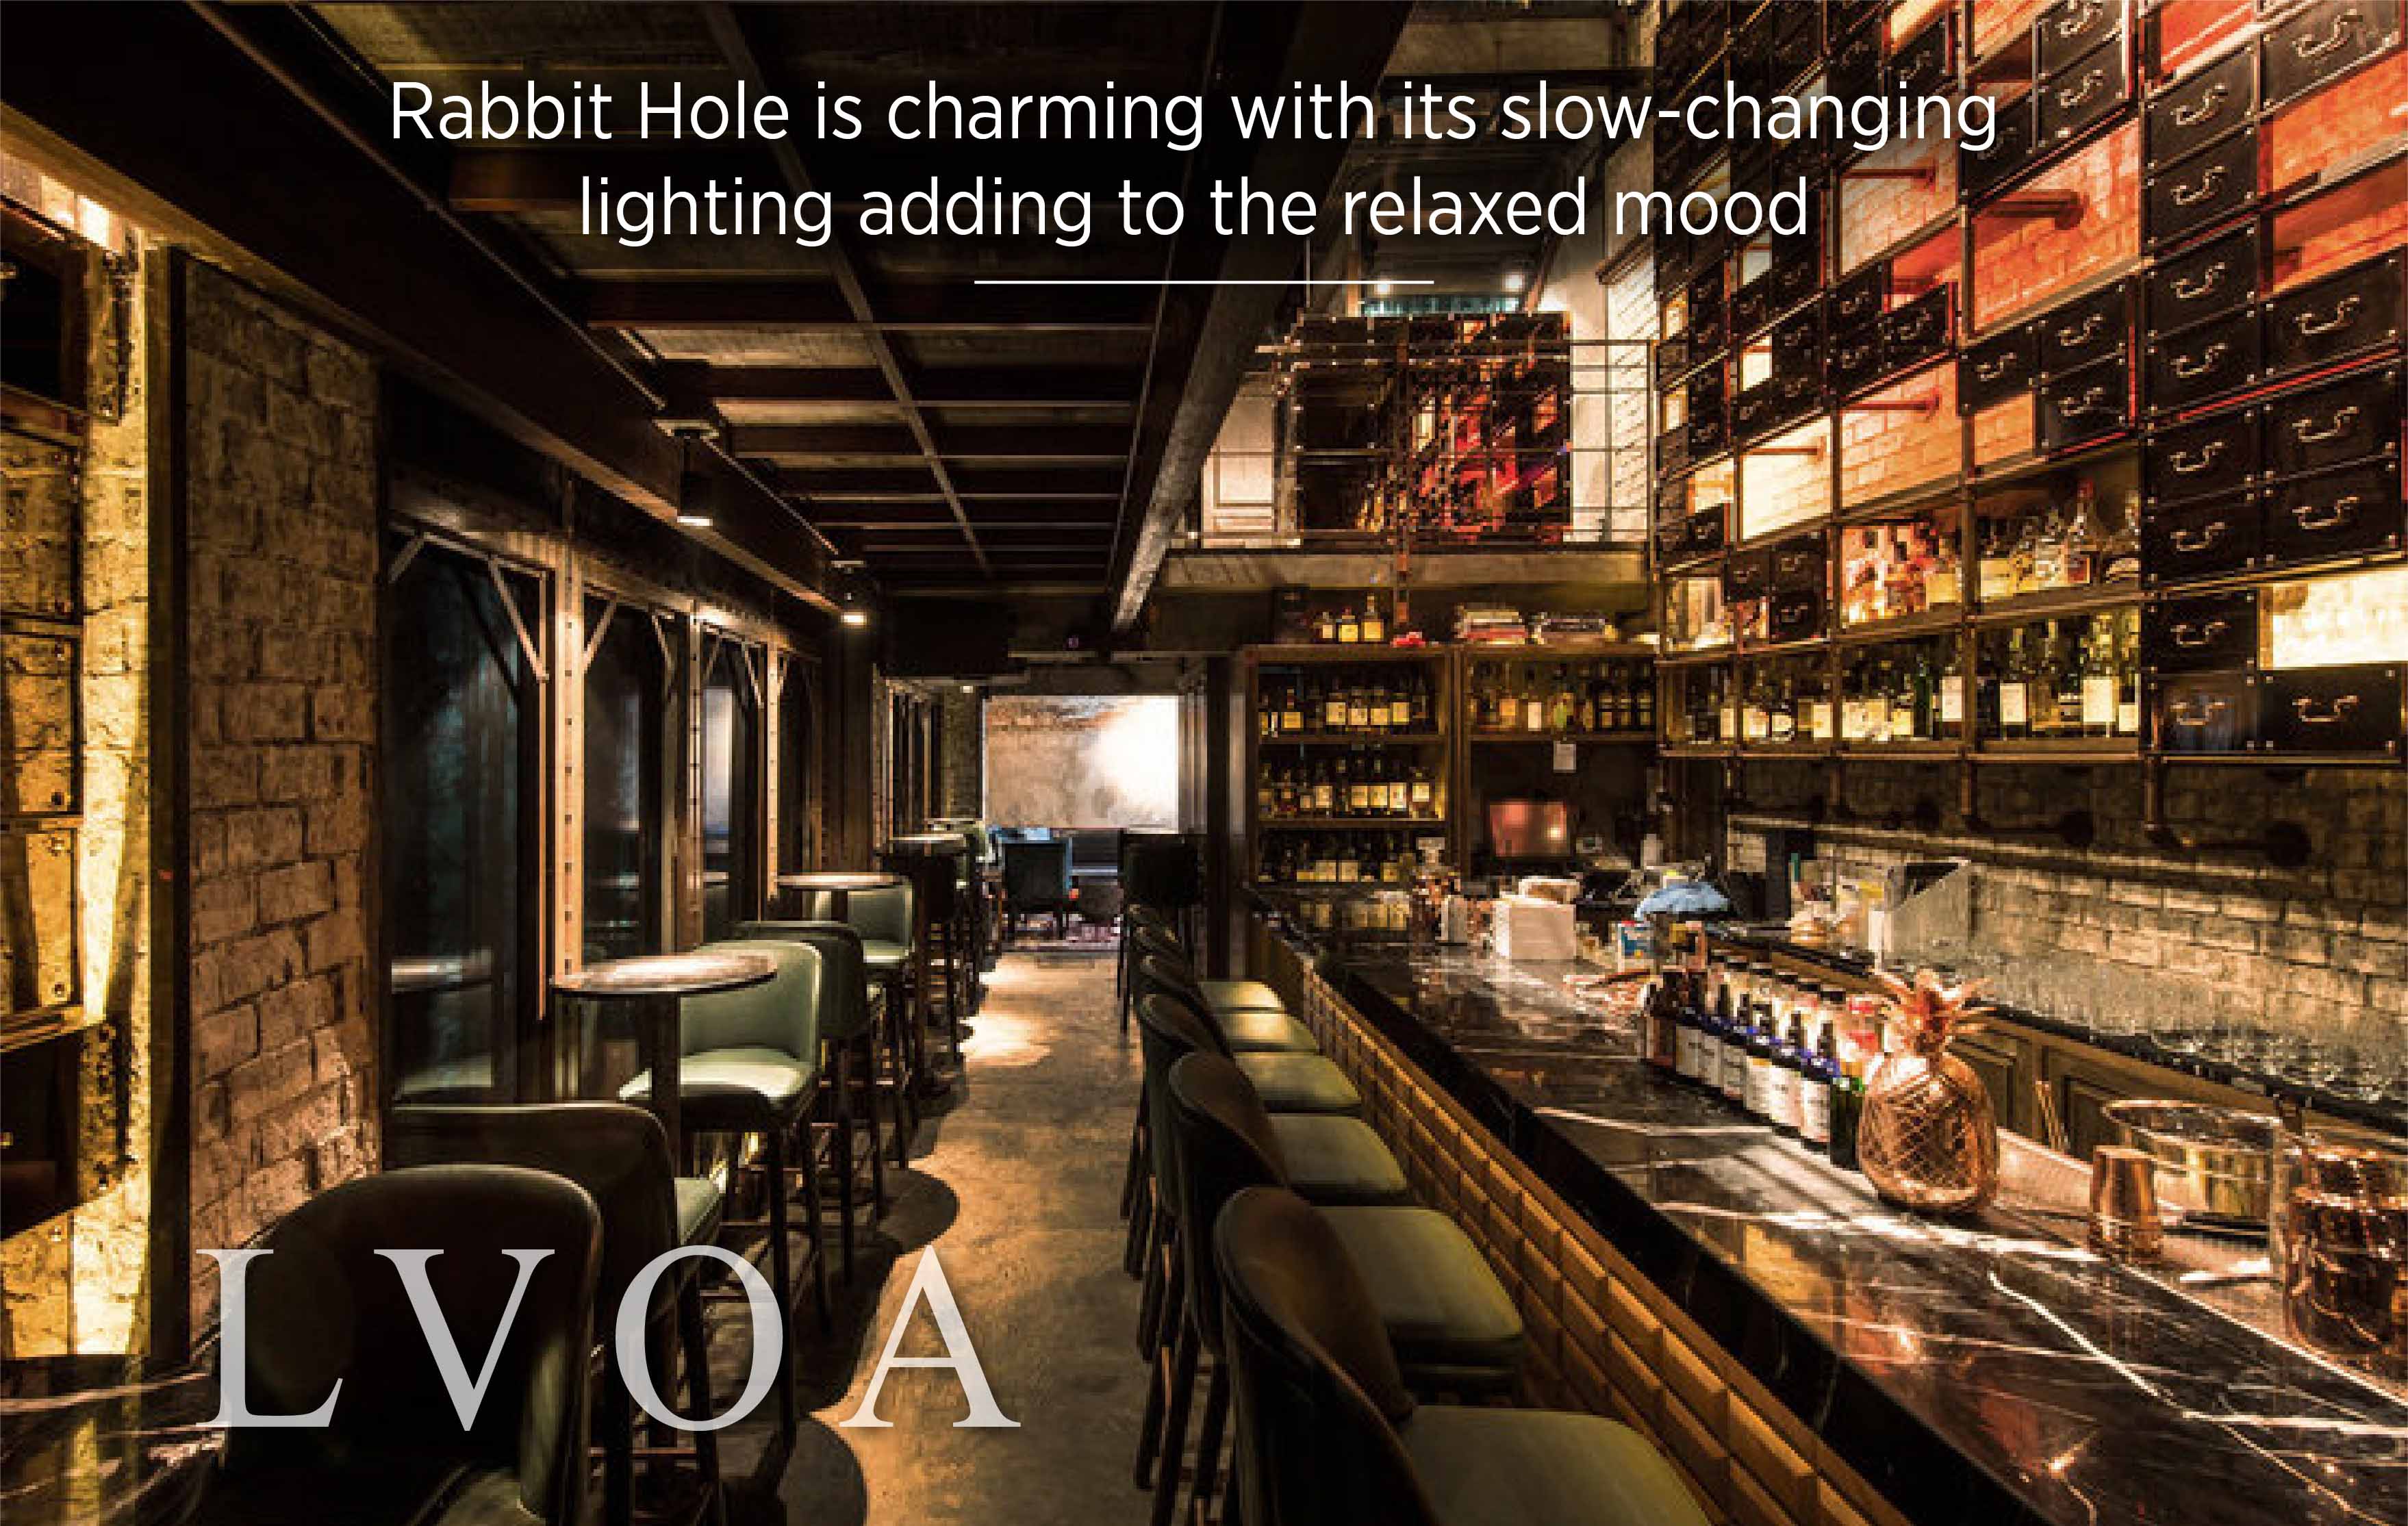 Rabbit-Hole-is-charming-with-its-slow-changing-lighting-adding-to-the-relaxed-mood